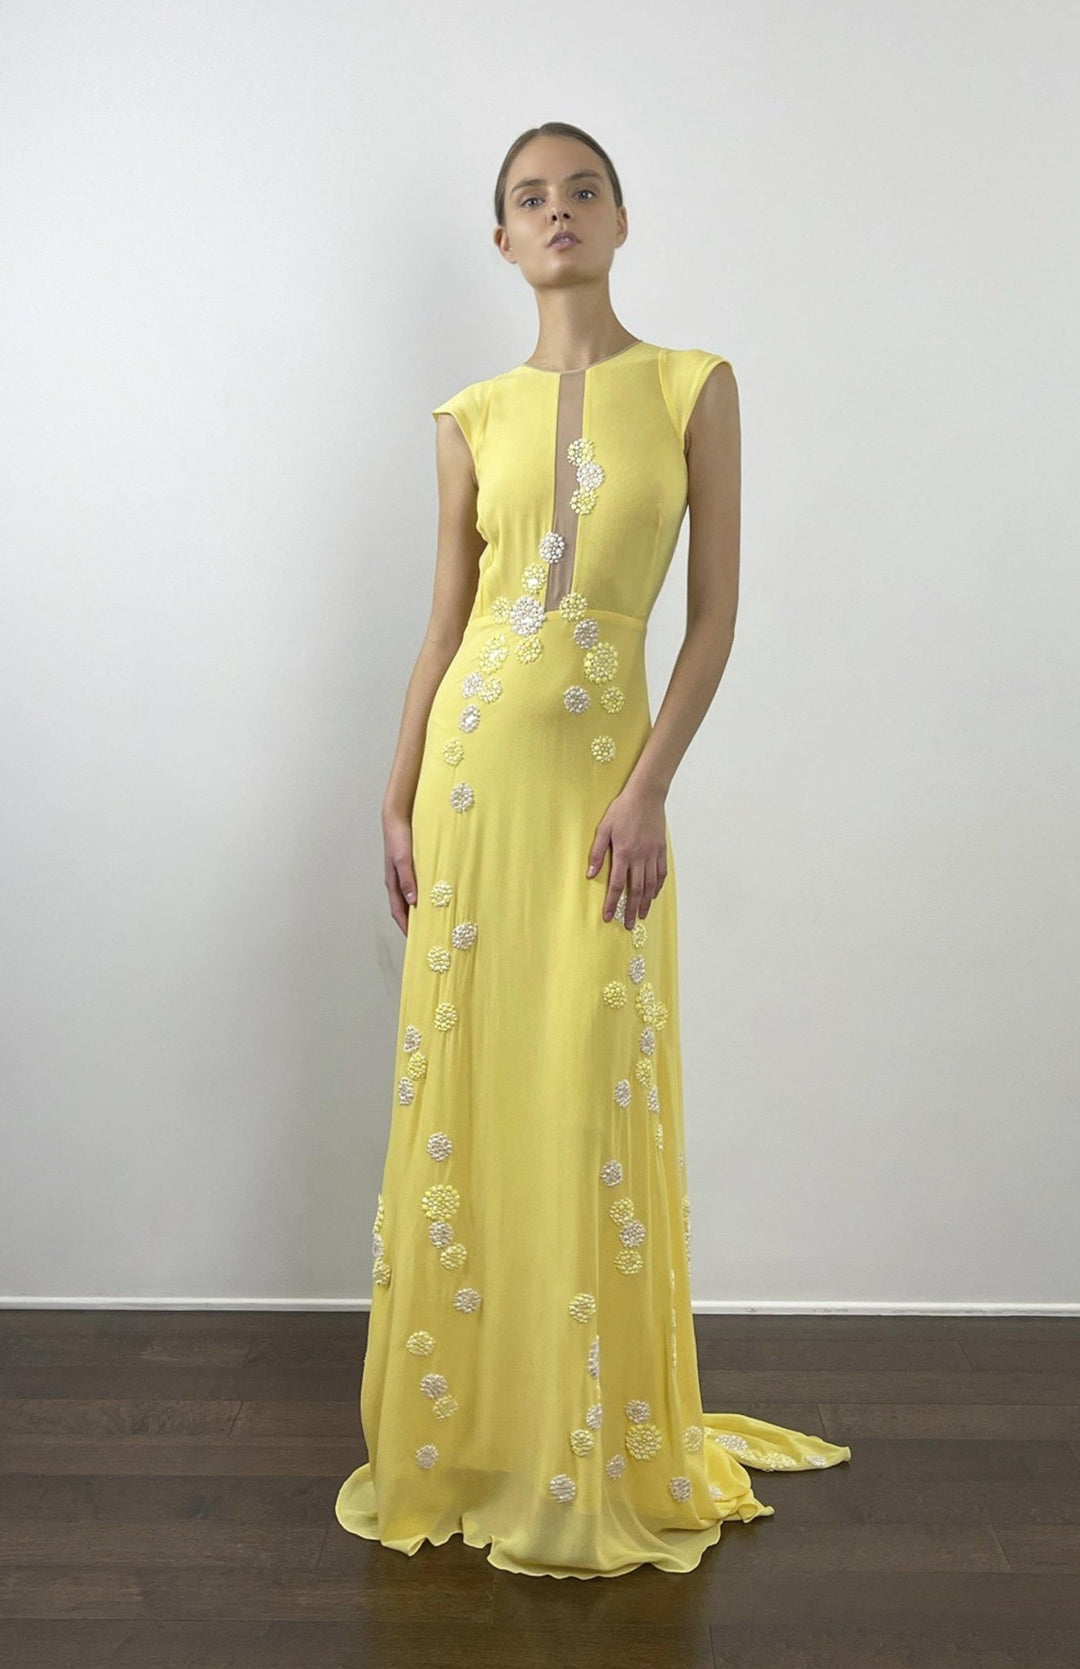 Yellow, sleeveless, red carpet dress with sheer, nude panels, hand applique lace embellishment and long train.